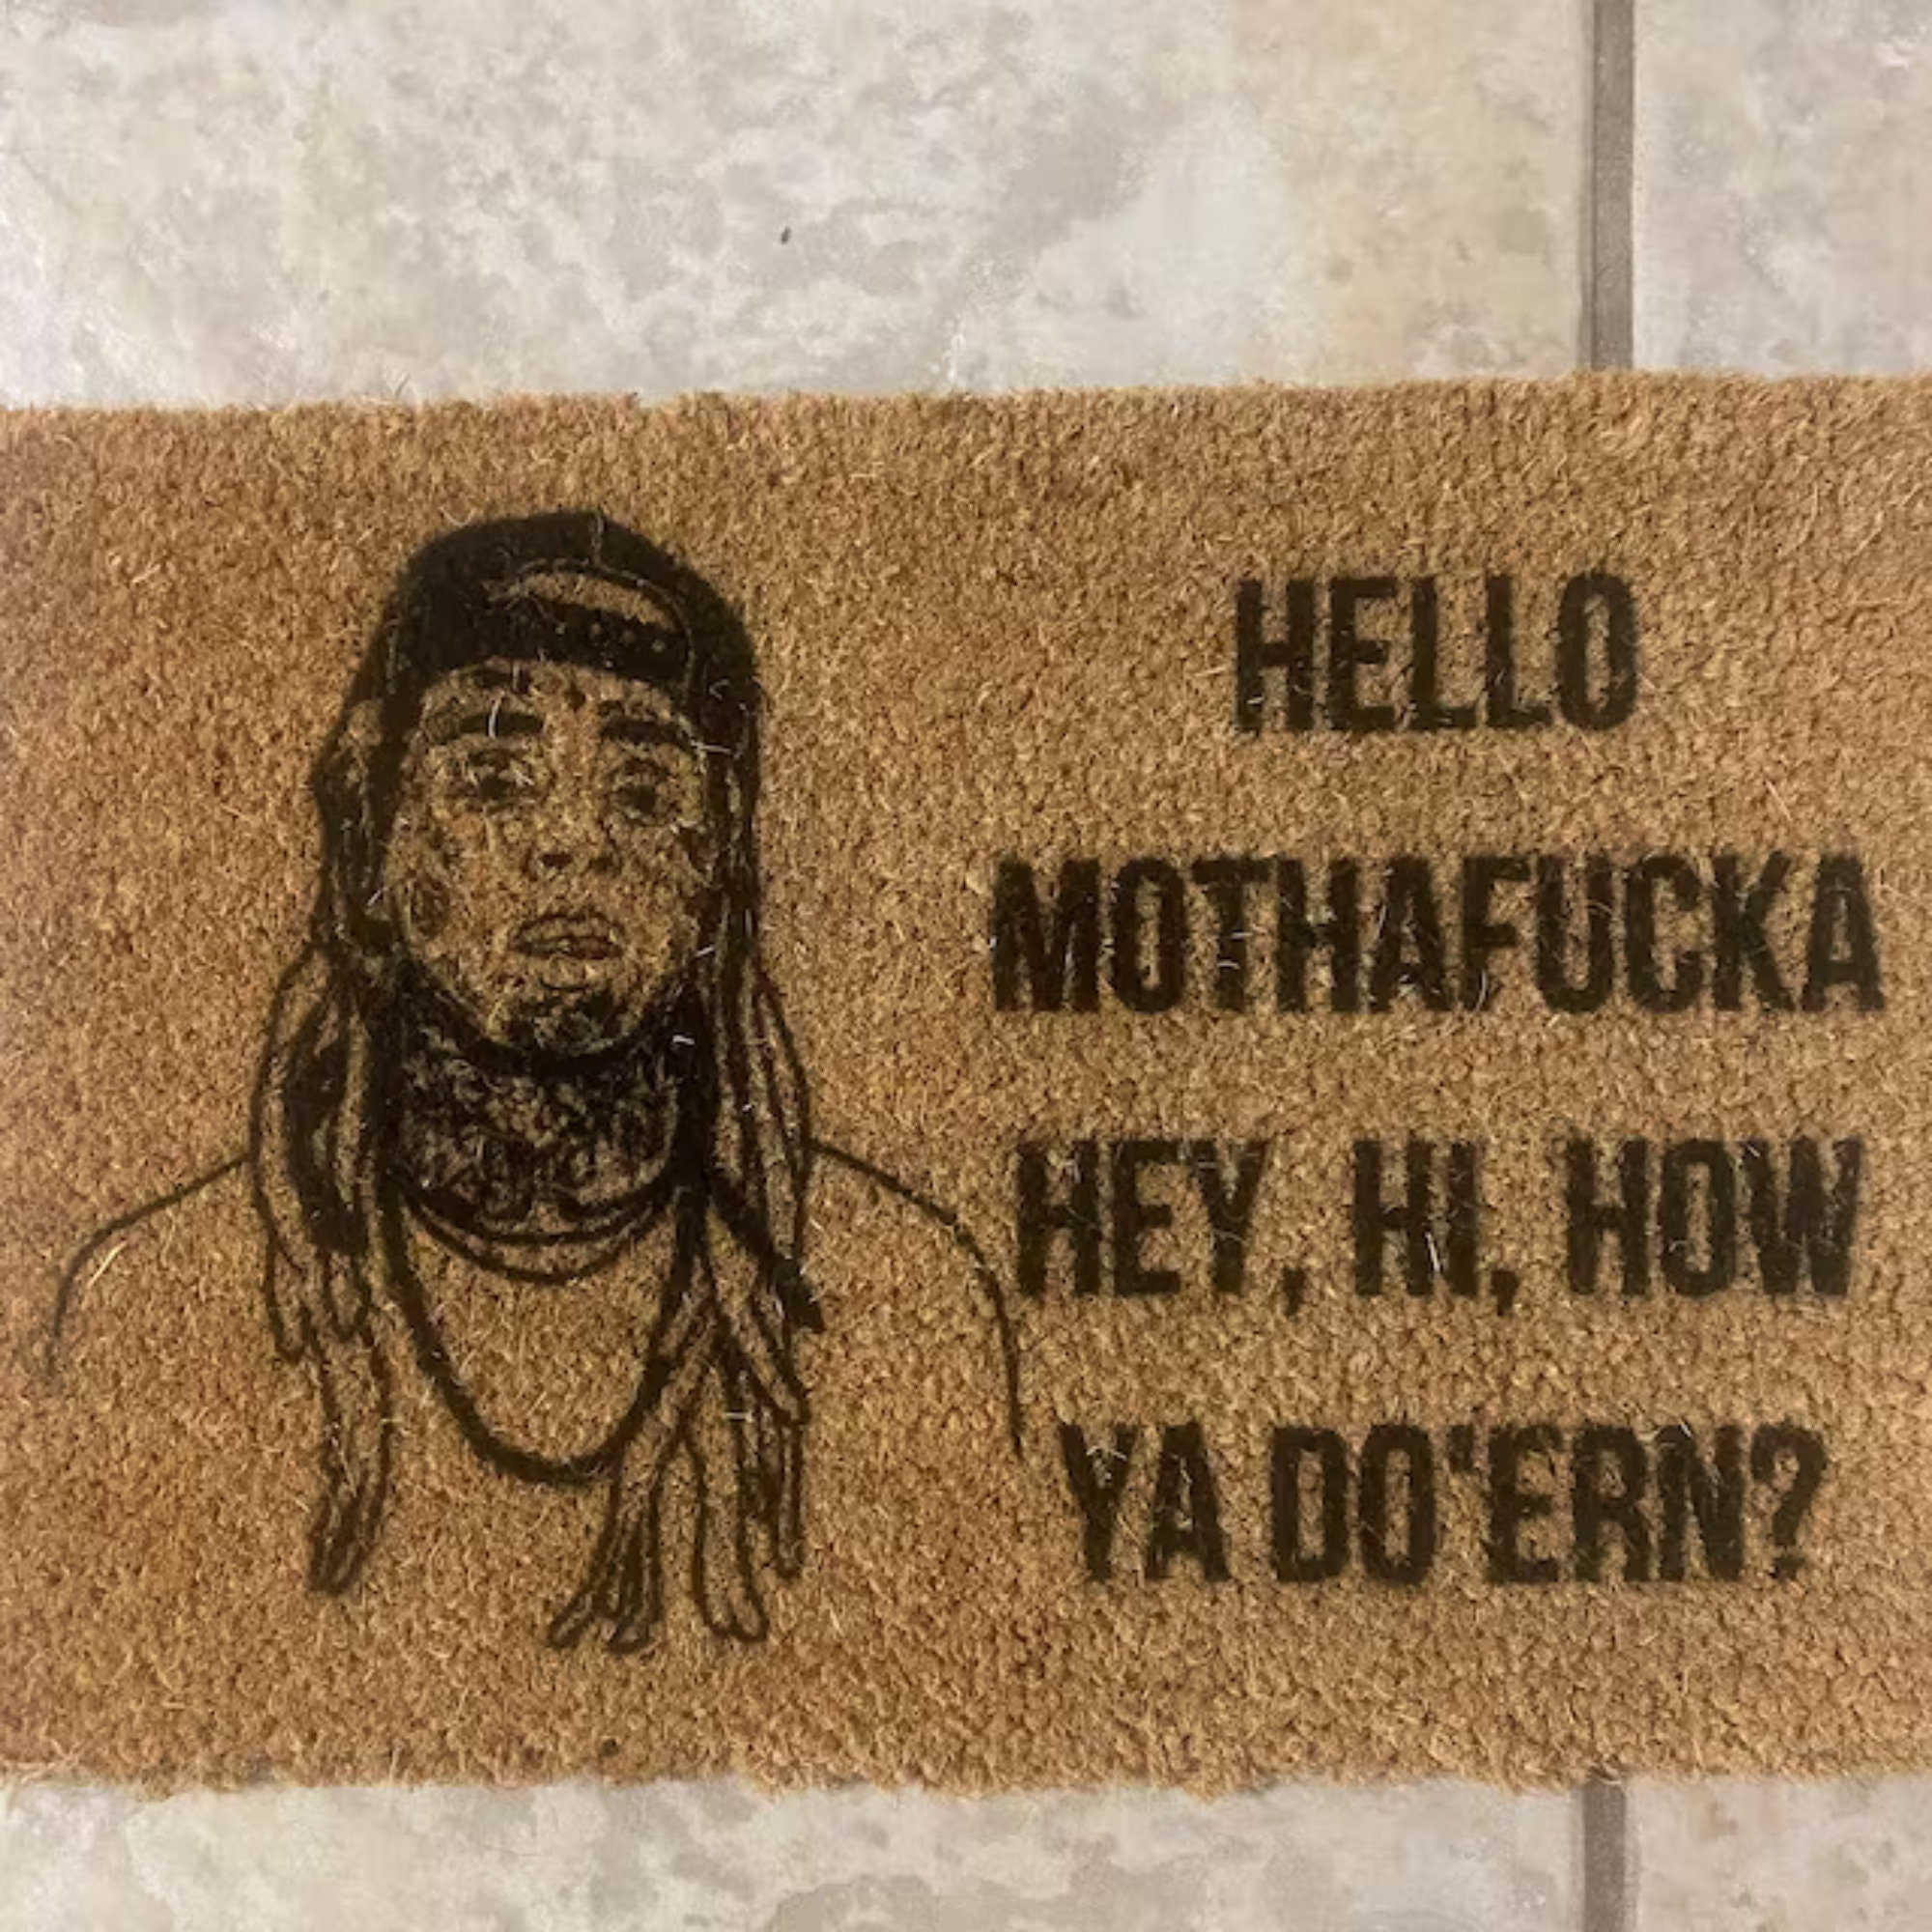 The Neighbors Think I'm Selling Dope Mf I Am Doormat, J. Cole Lyrics Funny  Welcome Mat, Outdoor Patio Rug, Housewarming Gift, Front Door Mat - Yahoo  Shopping